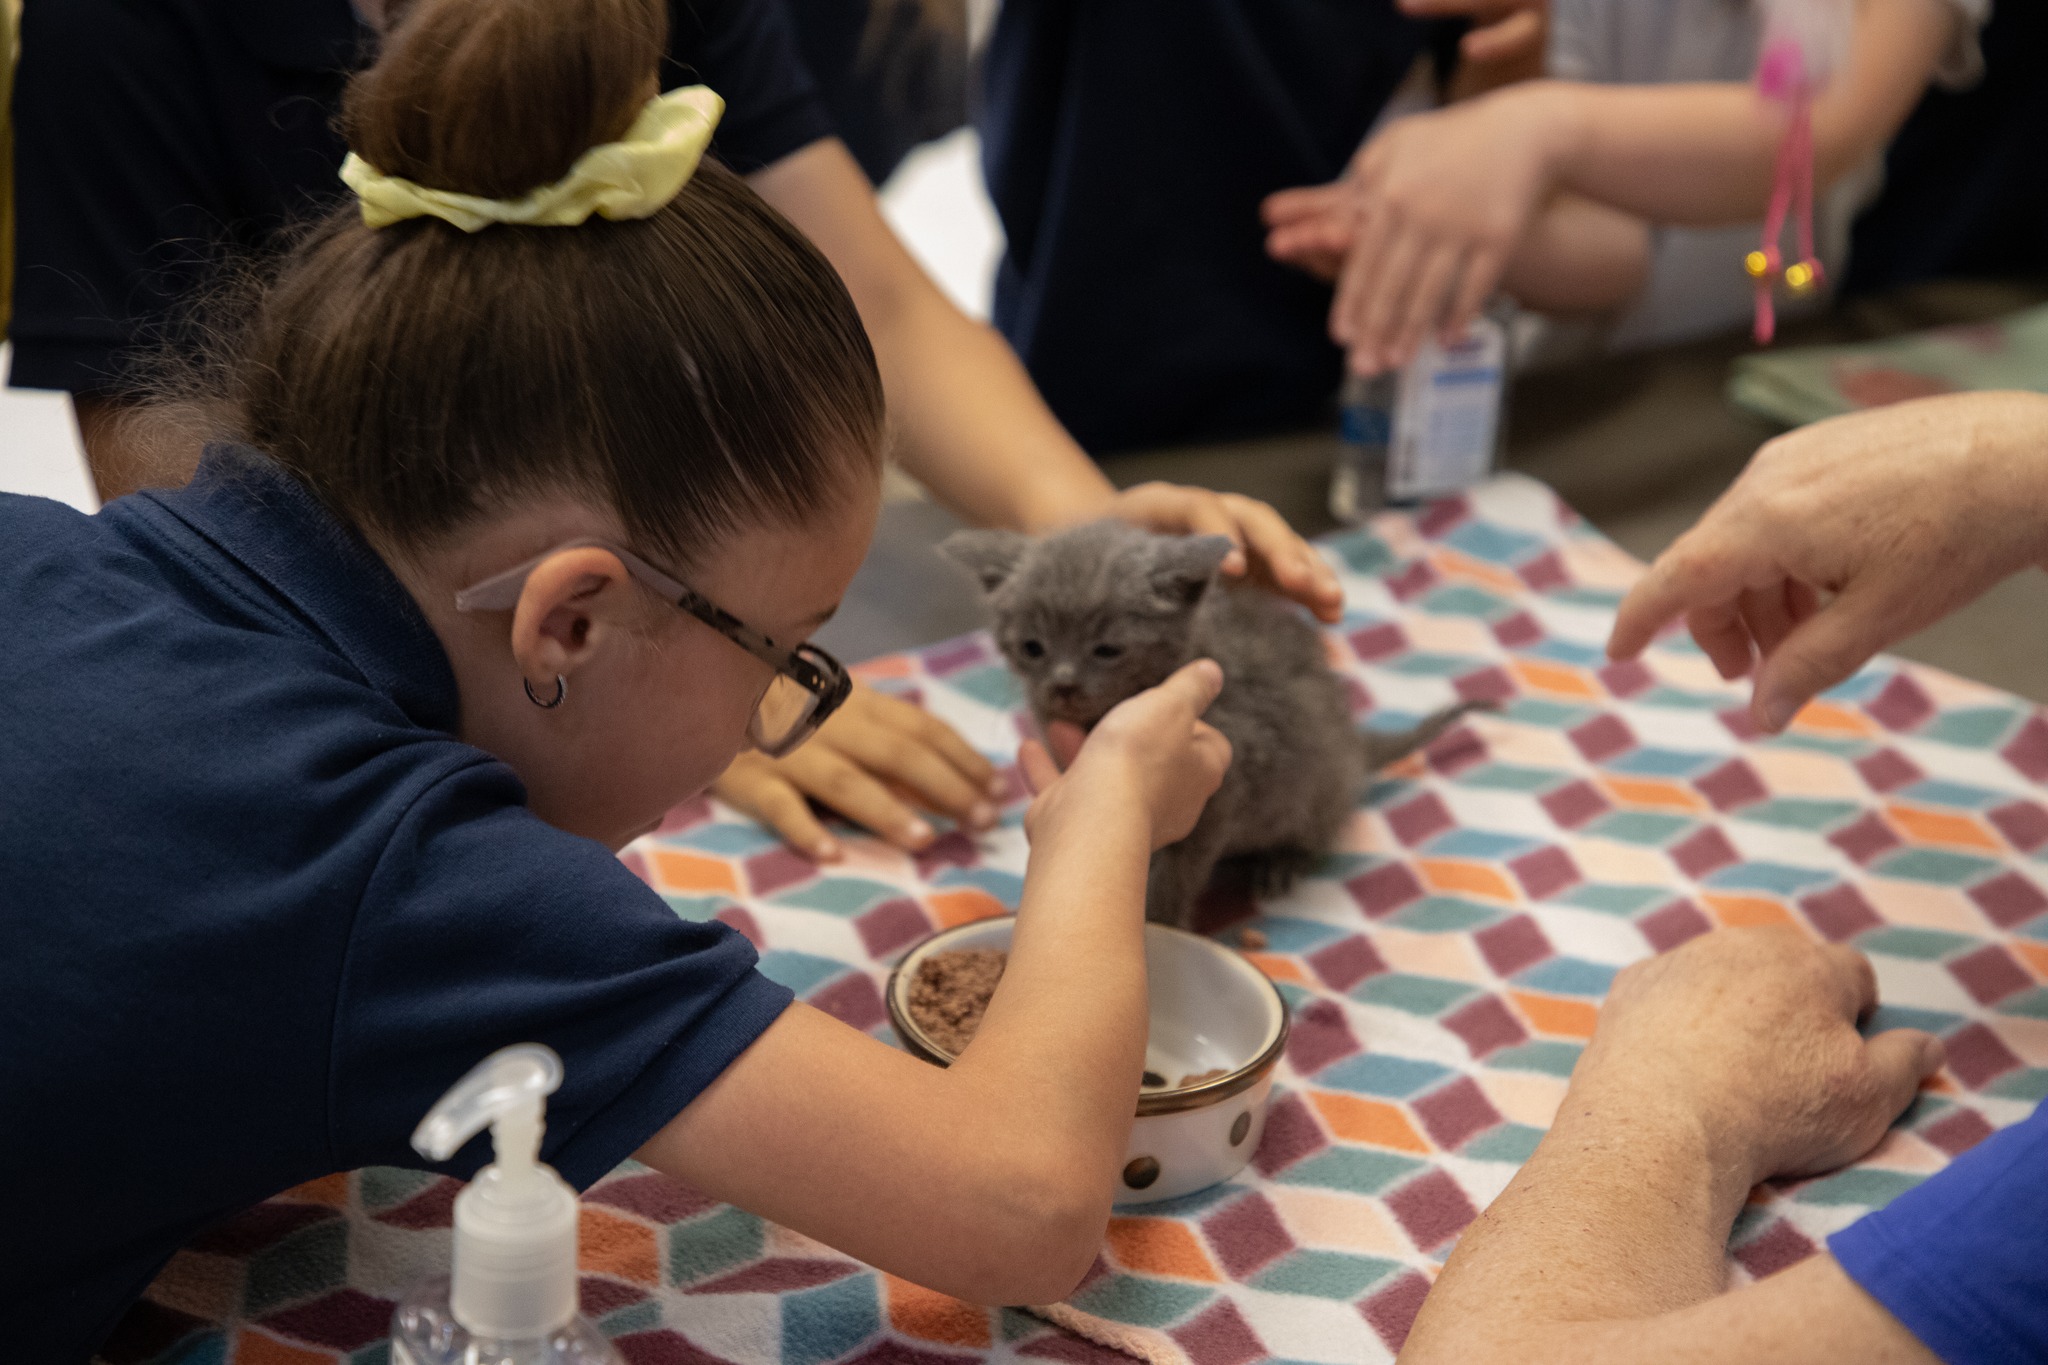 A little girl in glasses and a bun pets a small gray kitten